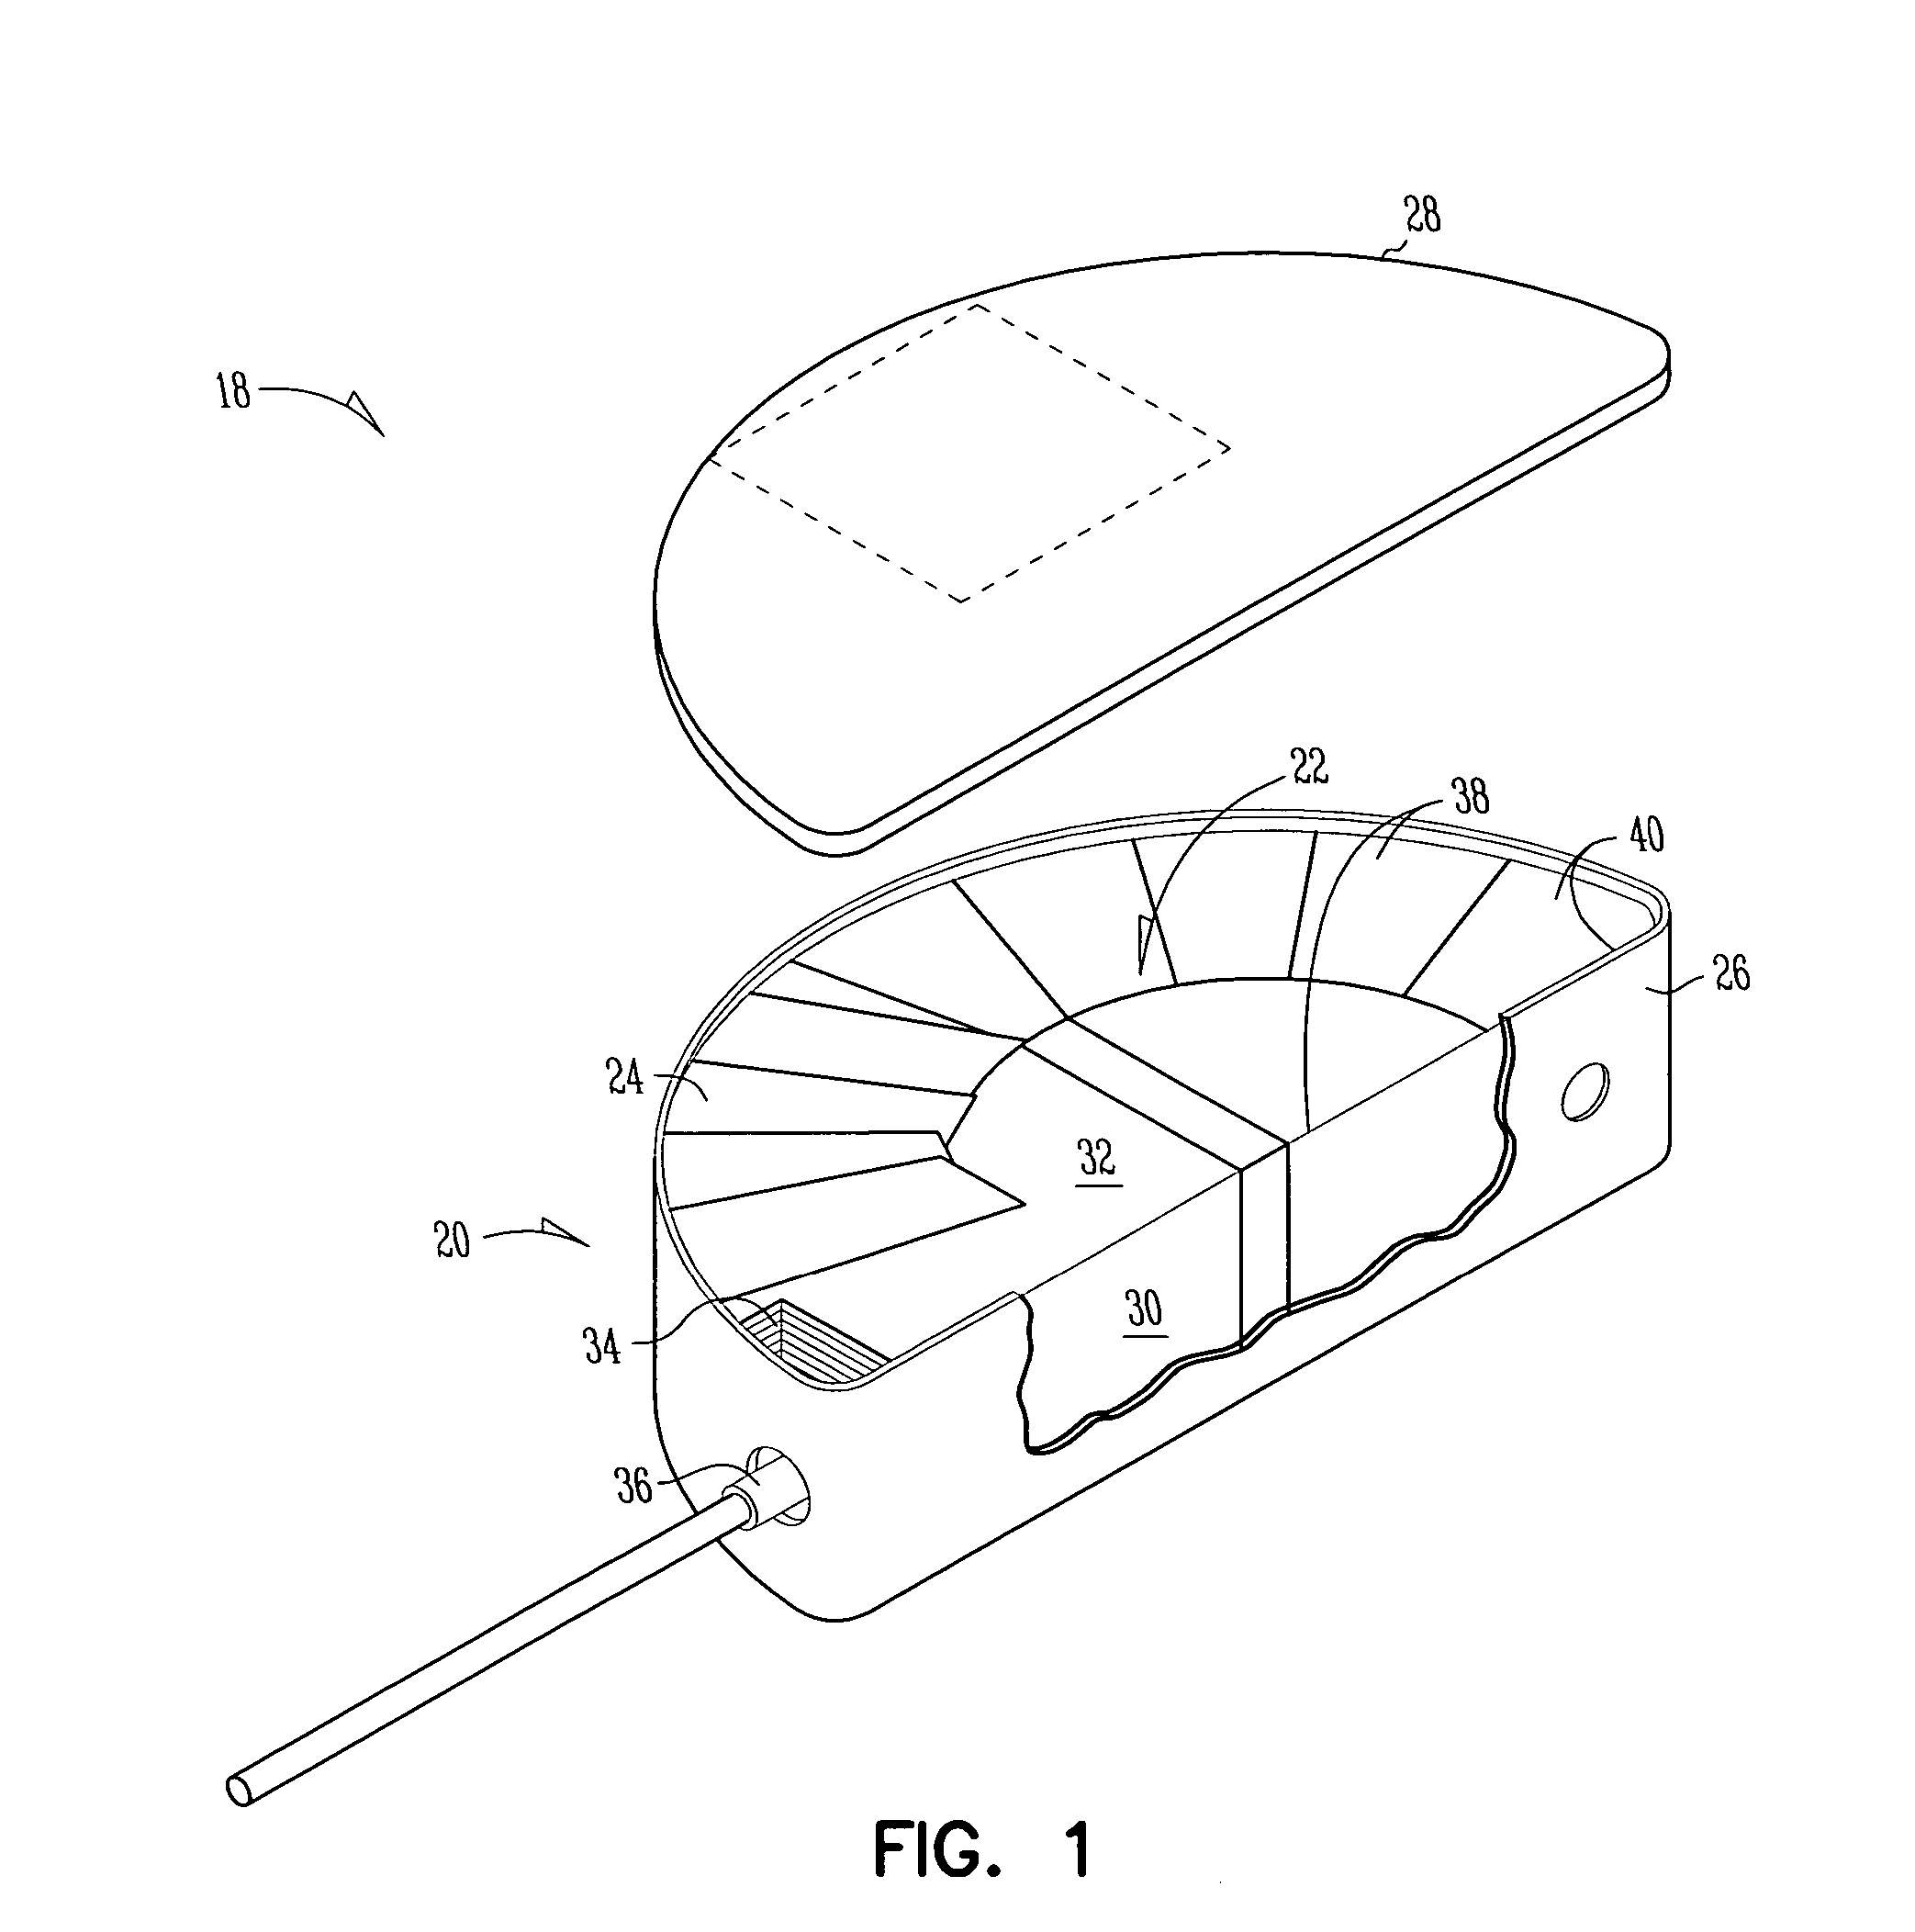 Method of constructing a capacitor stack for a flat capacitor